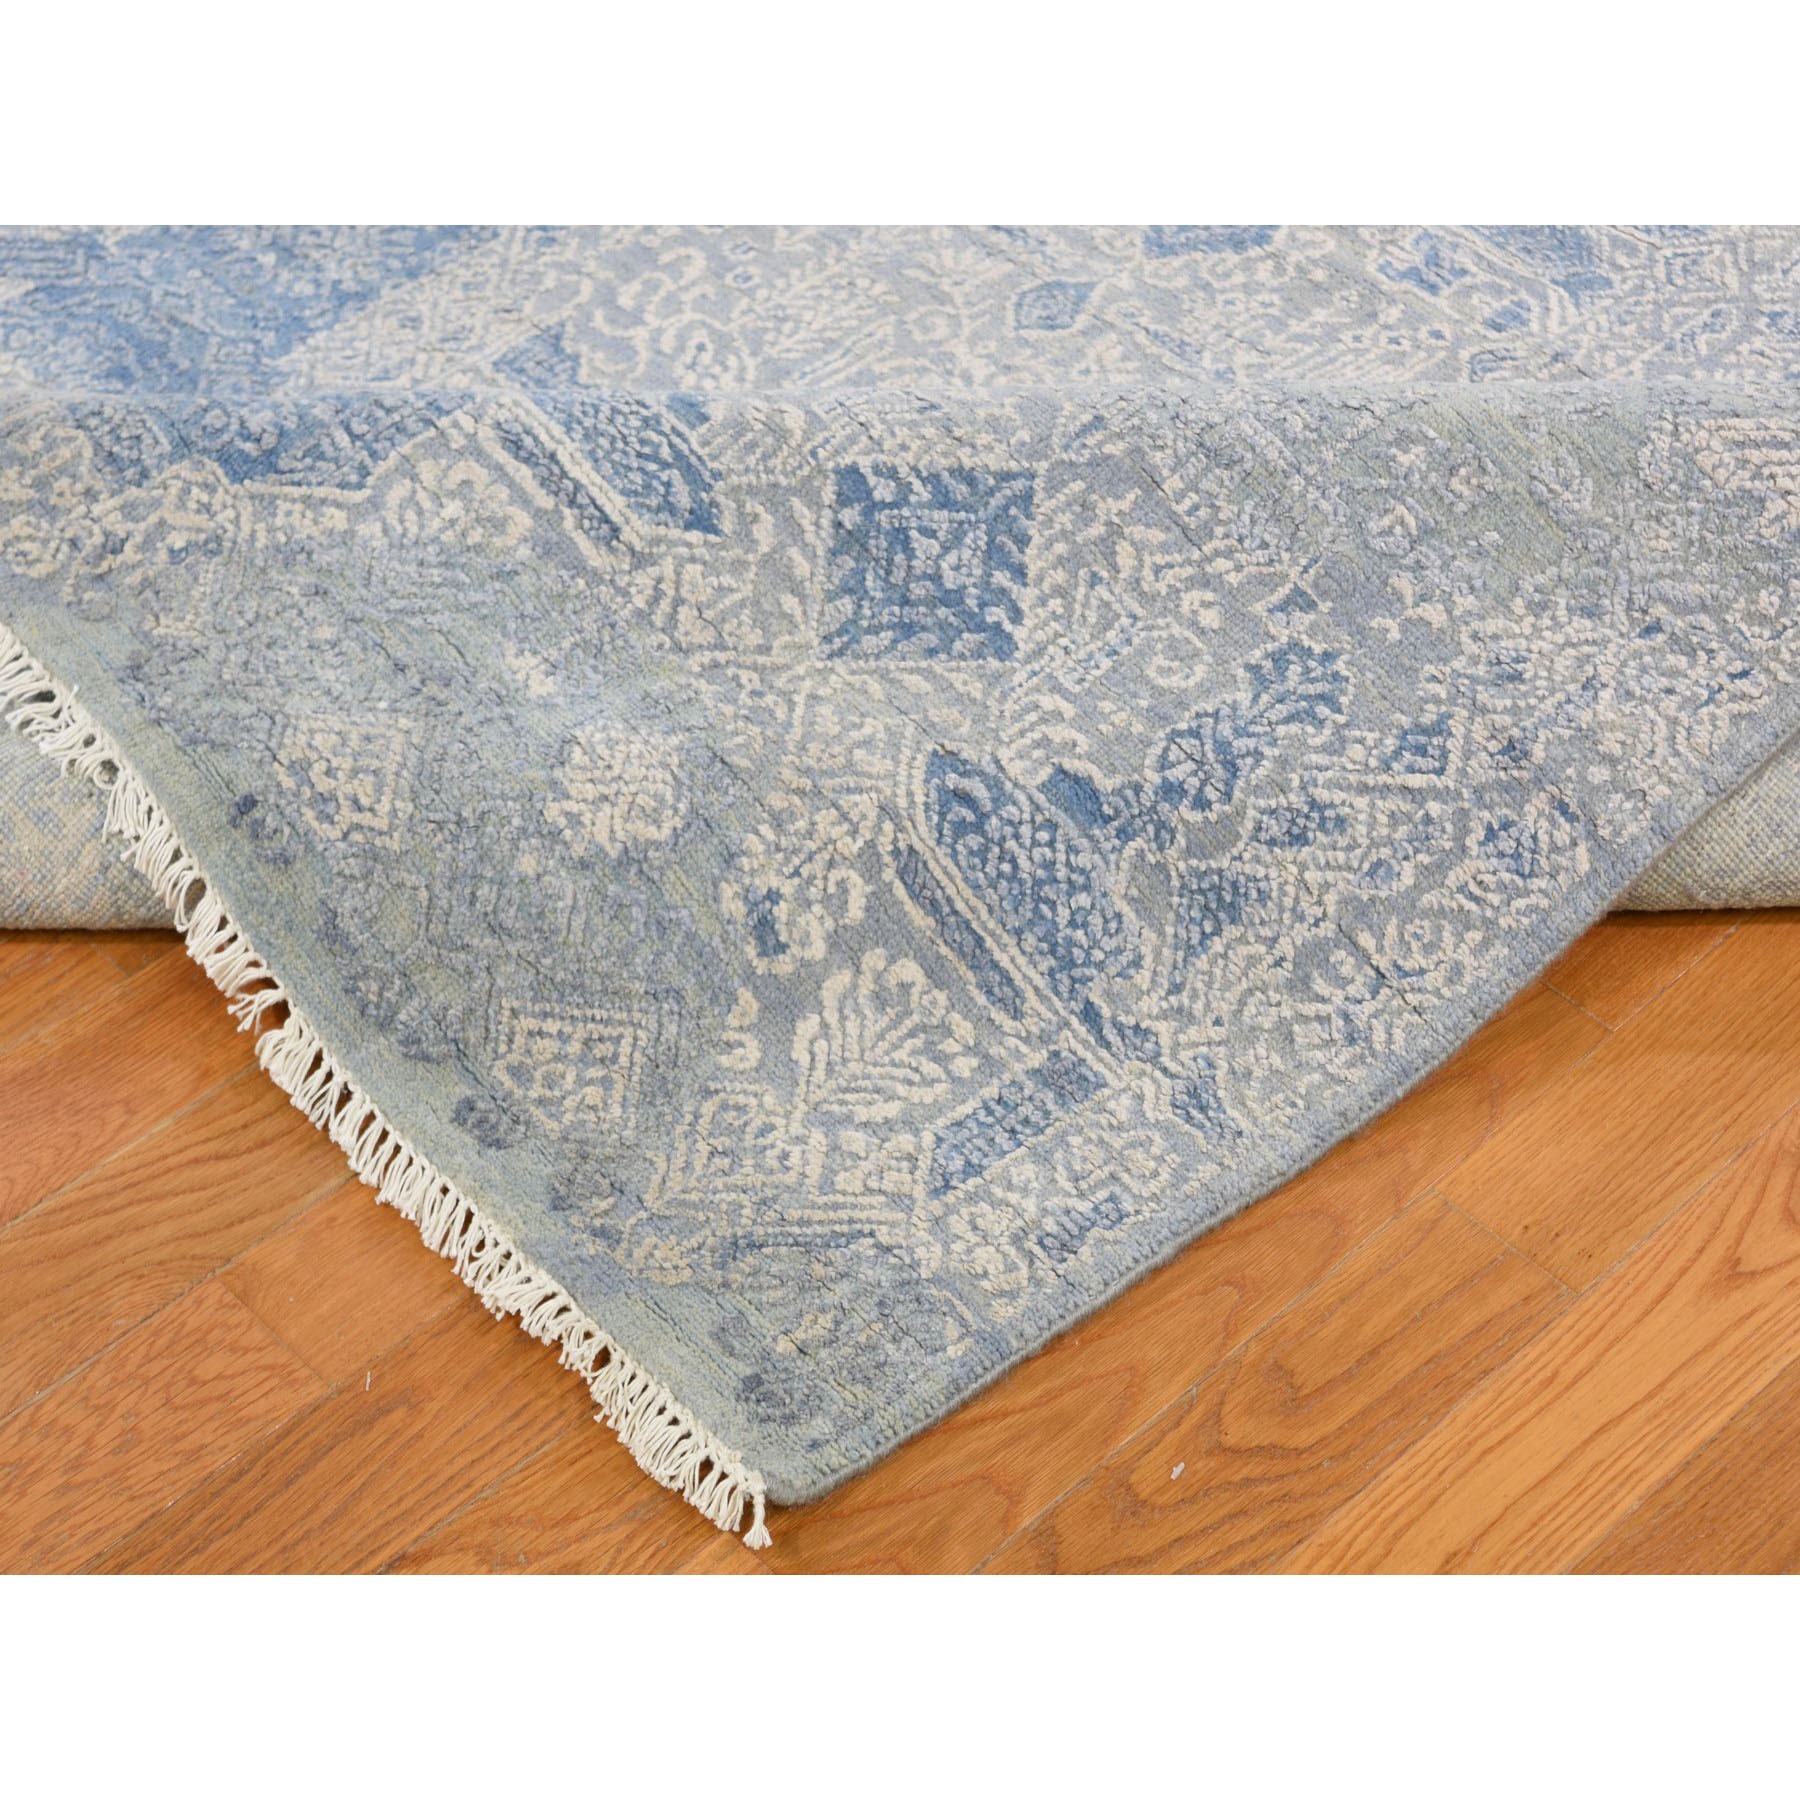 8-10 x12- Blue Wool And Pure Silk Jewellery Design Hand Knotted Oriental Rug 